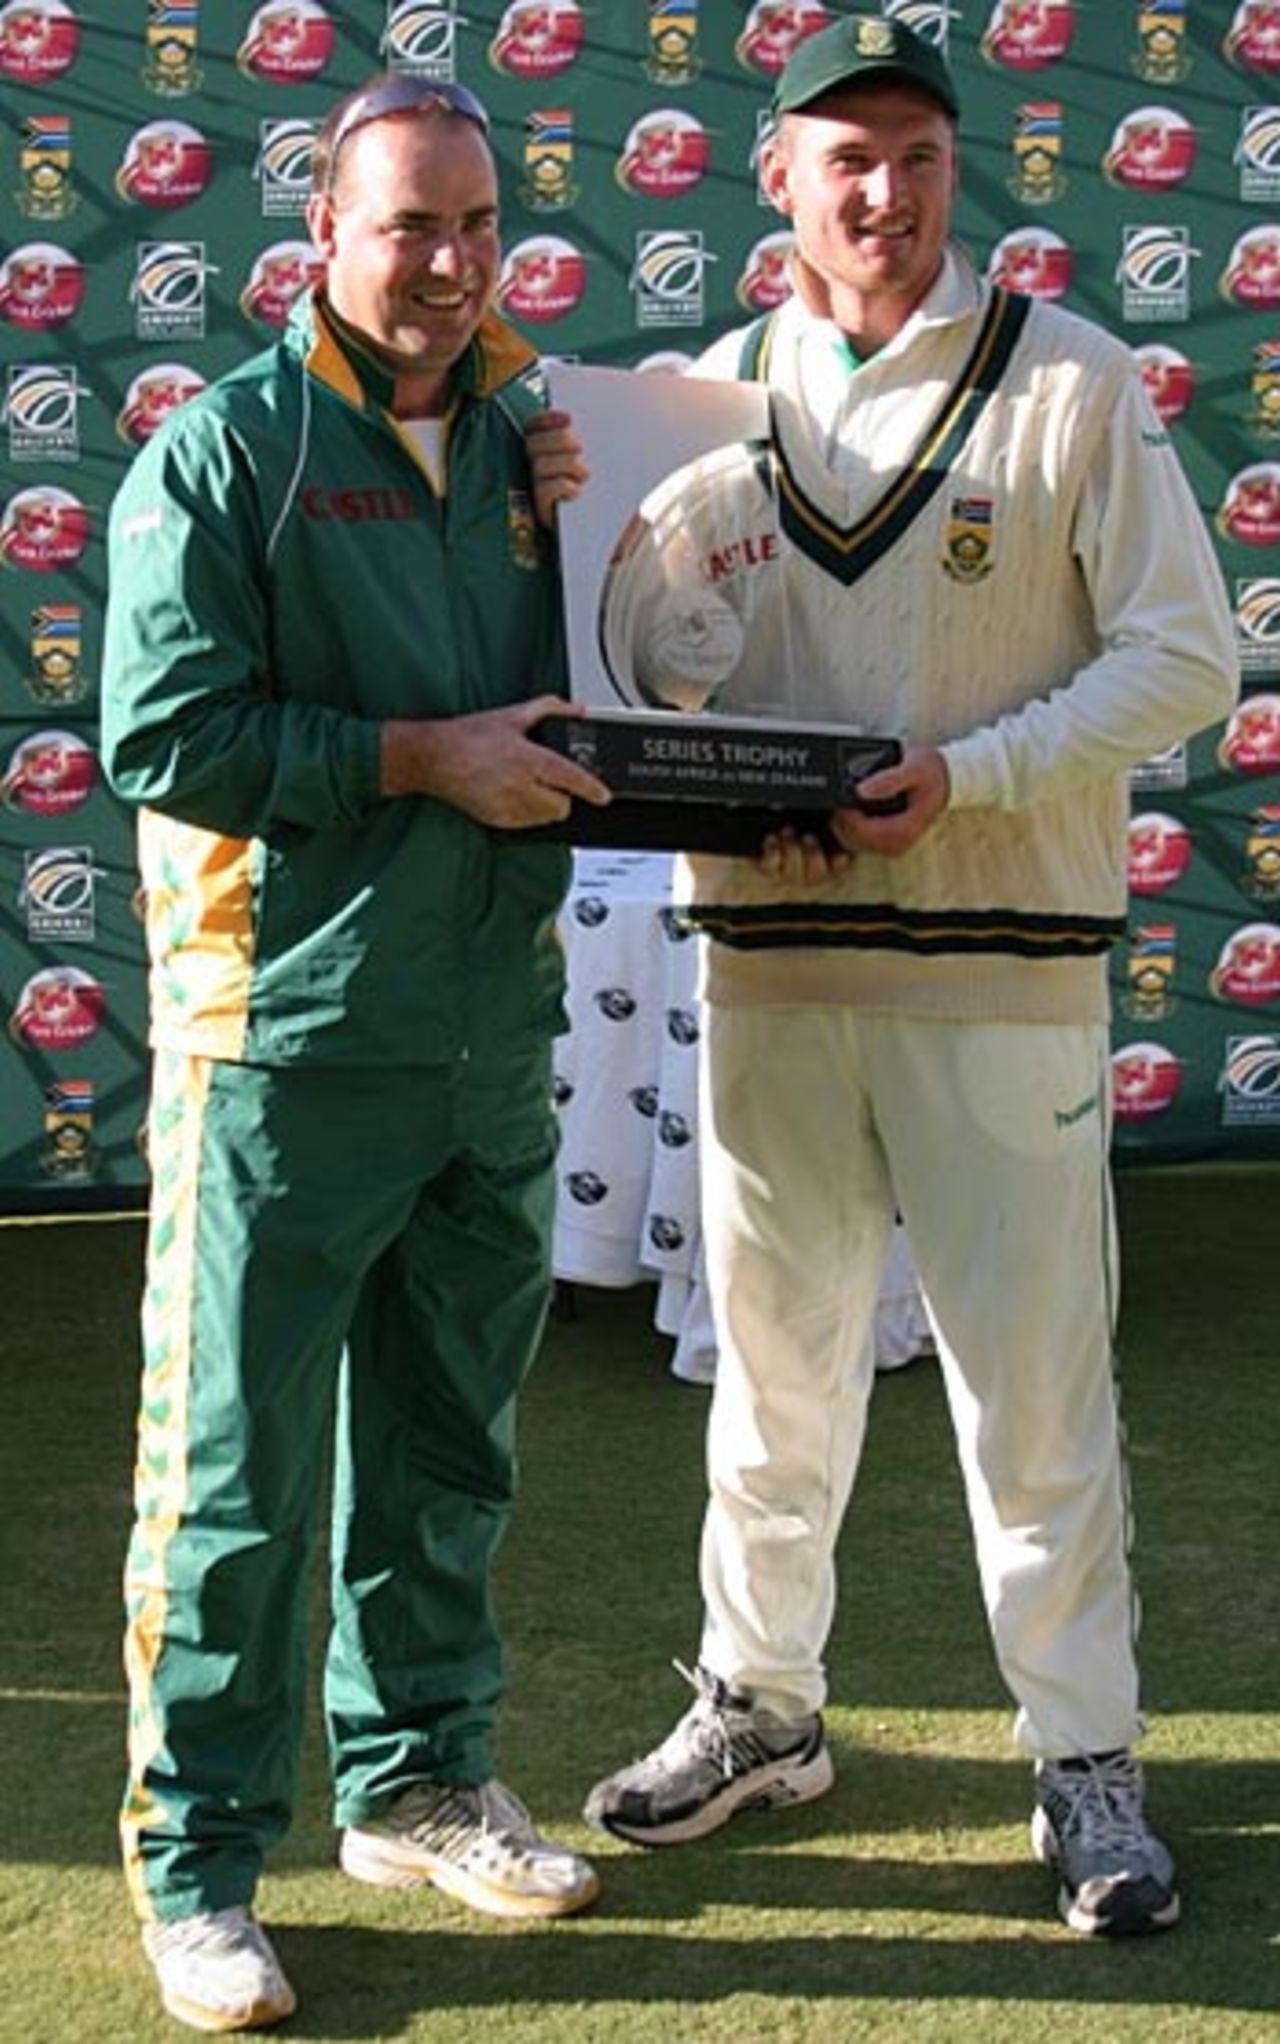 Mickey Arthur and Graeme Smith with the series trophy, South Africa v New Zealand, 3rd Test, Johannesburg, May 7, 2006